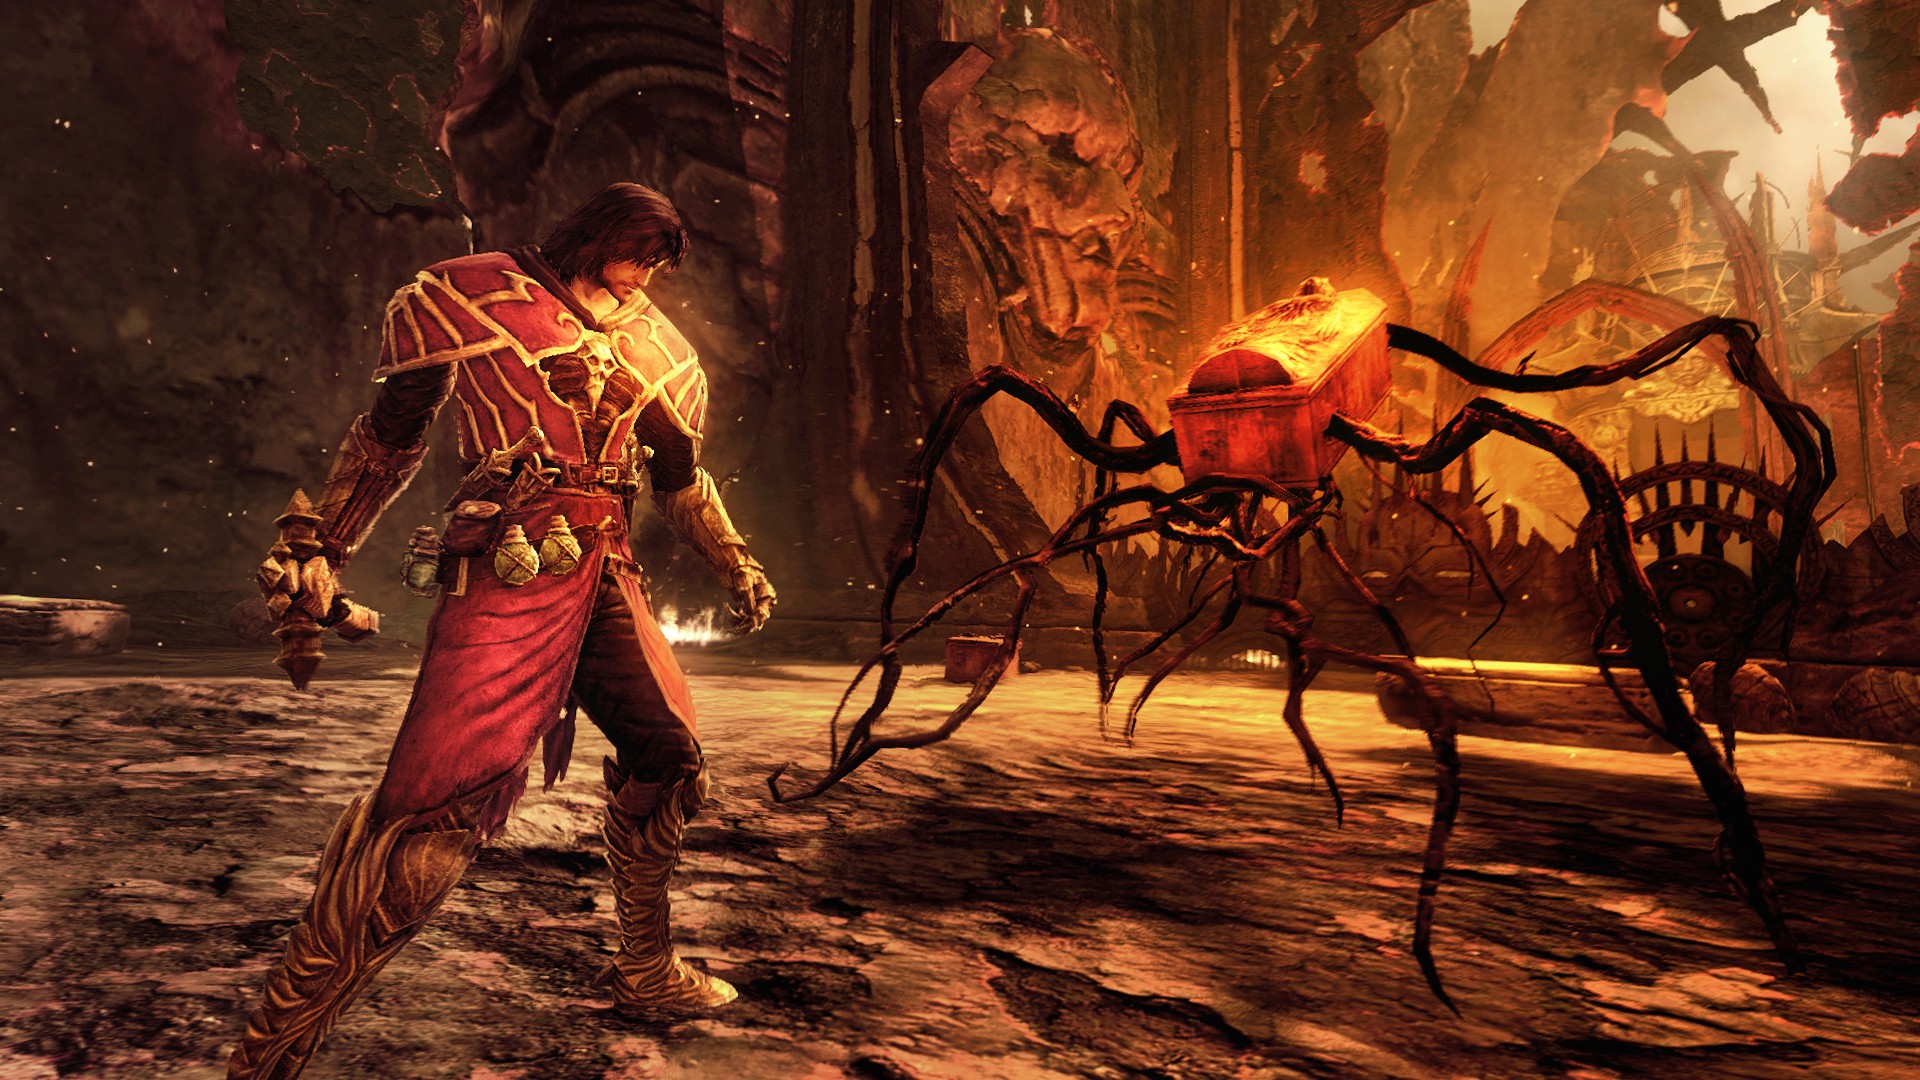 Castlevania: Lords of Shadow screenshots, images and pictures - Giant Bomb